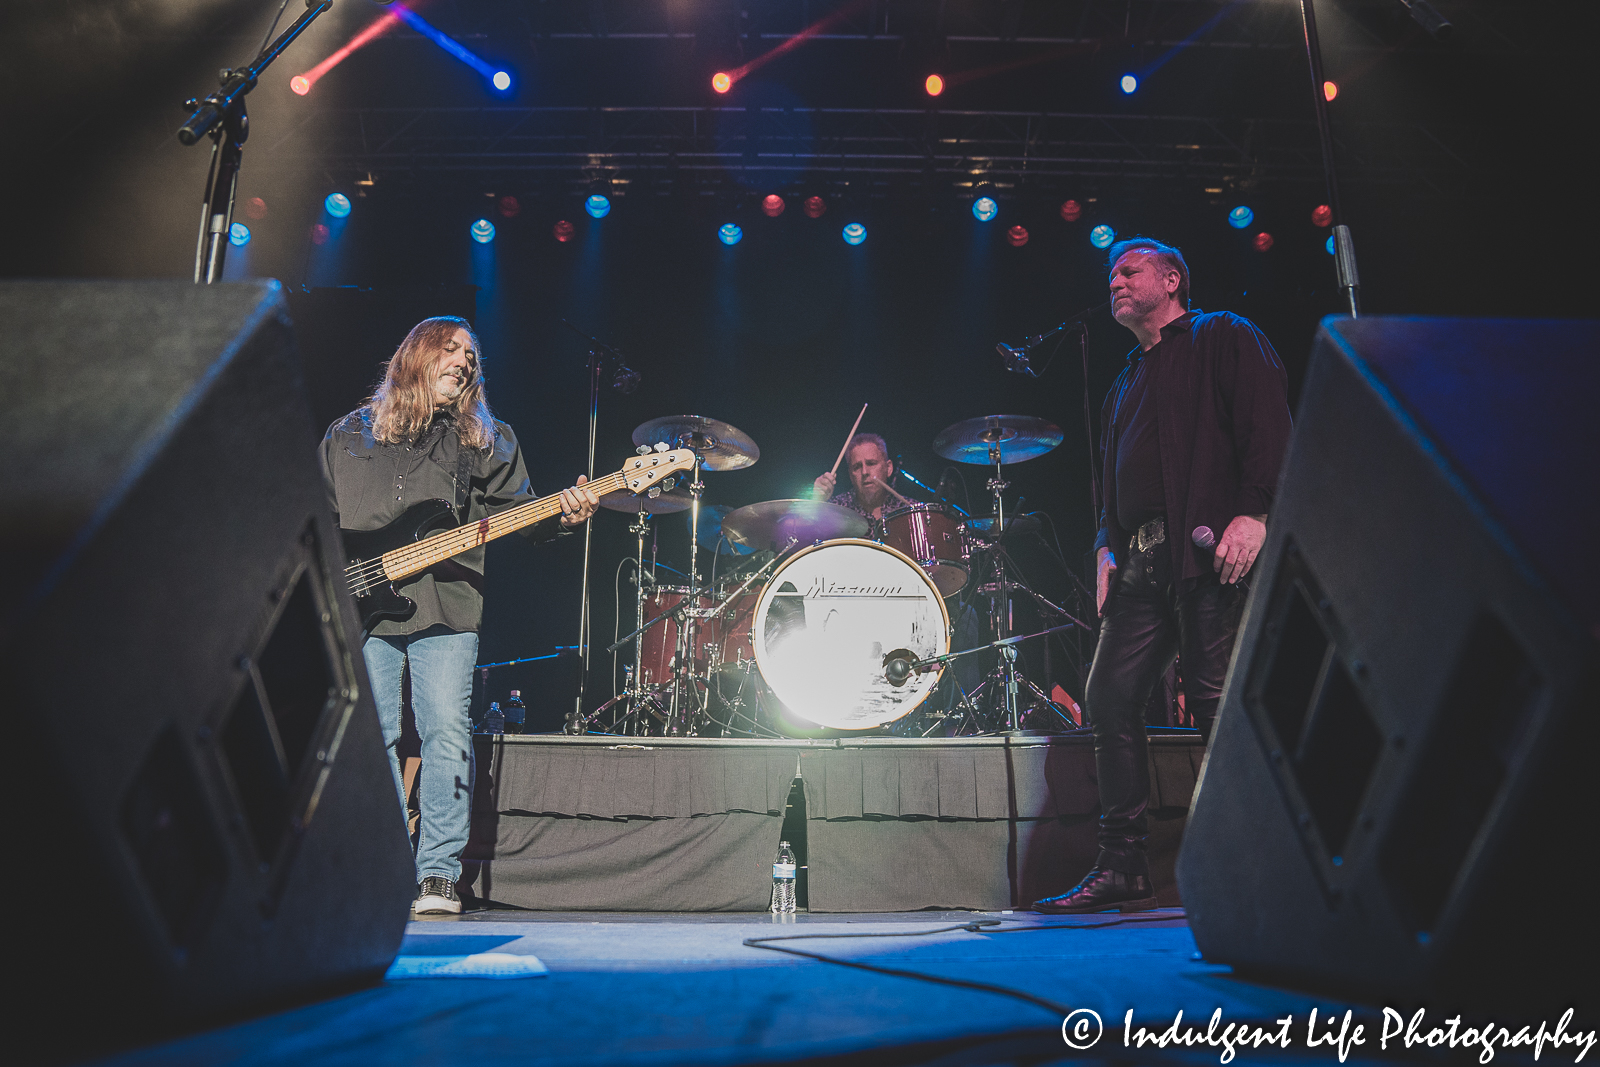 Missouri band members Stephen Cambell, Dean Foltz and Bill Larson performing together at Ameristar Casino's Star Pavilion in Kansas City on April 9, 2022.